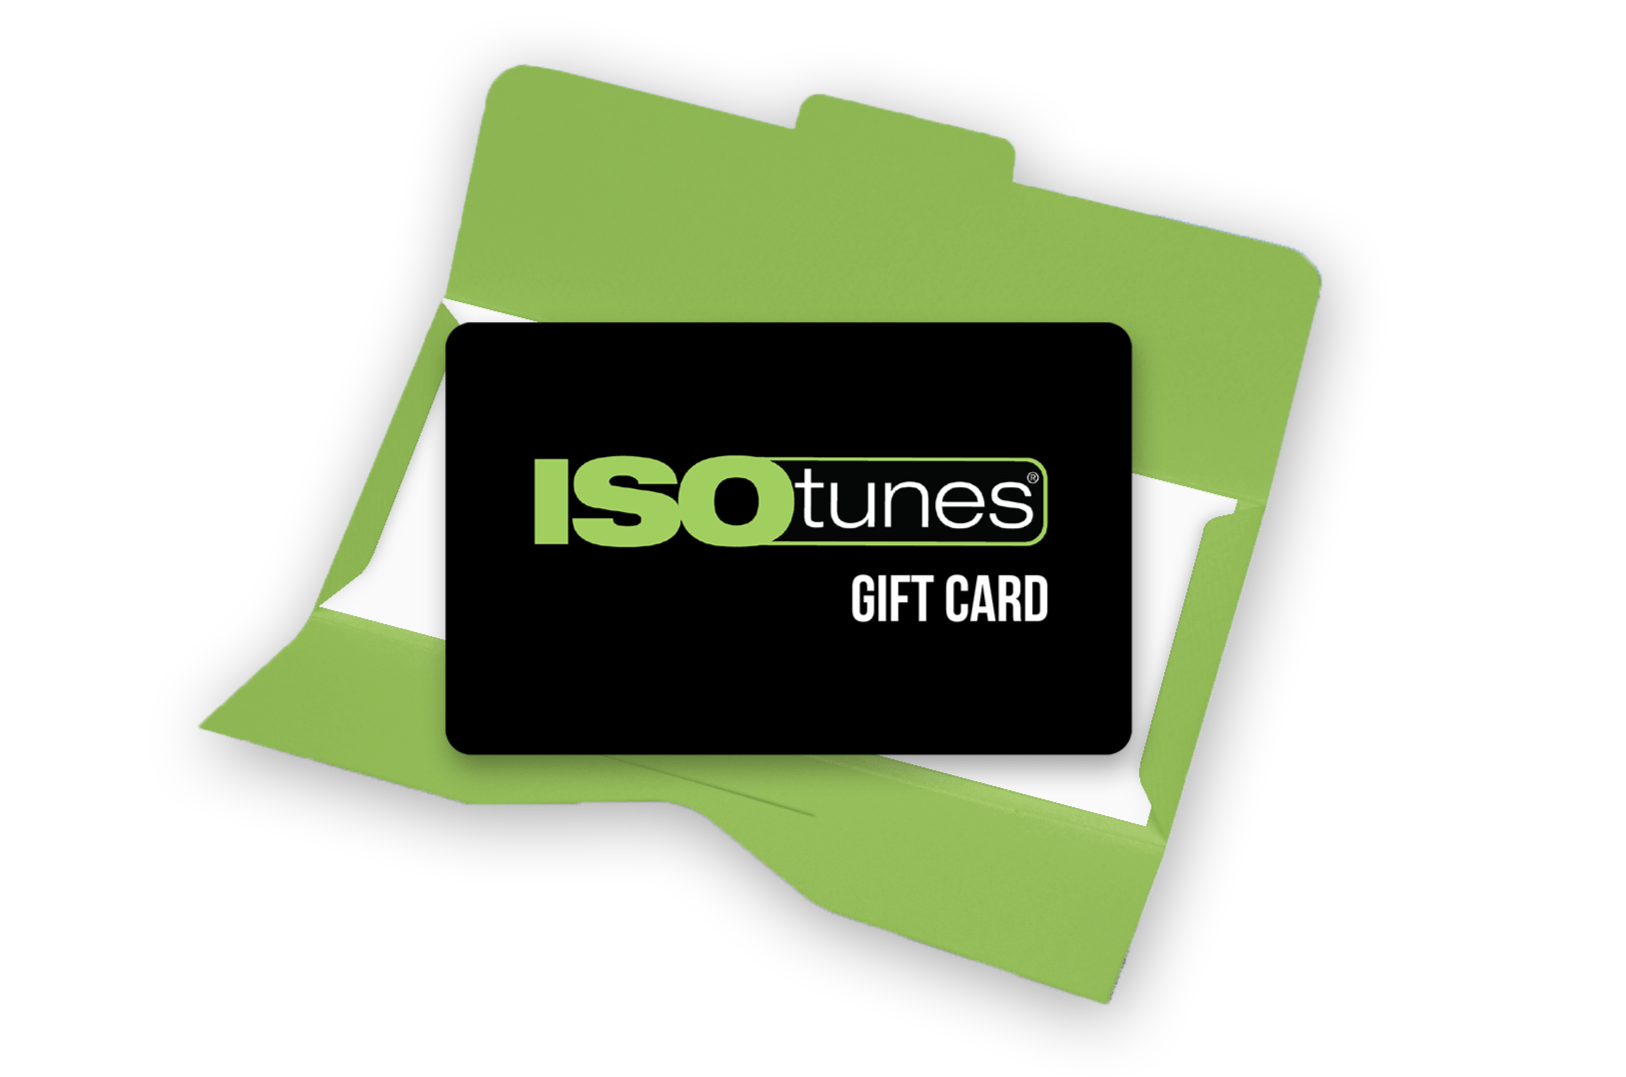 Gift Card - ISOtunes®